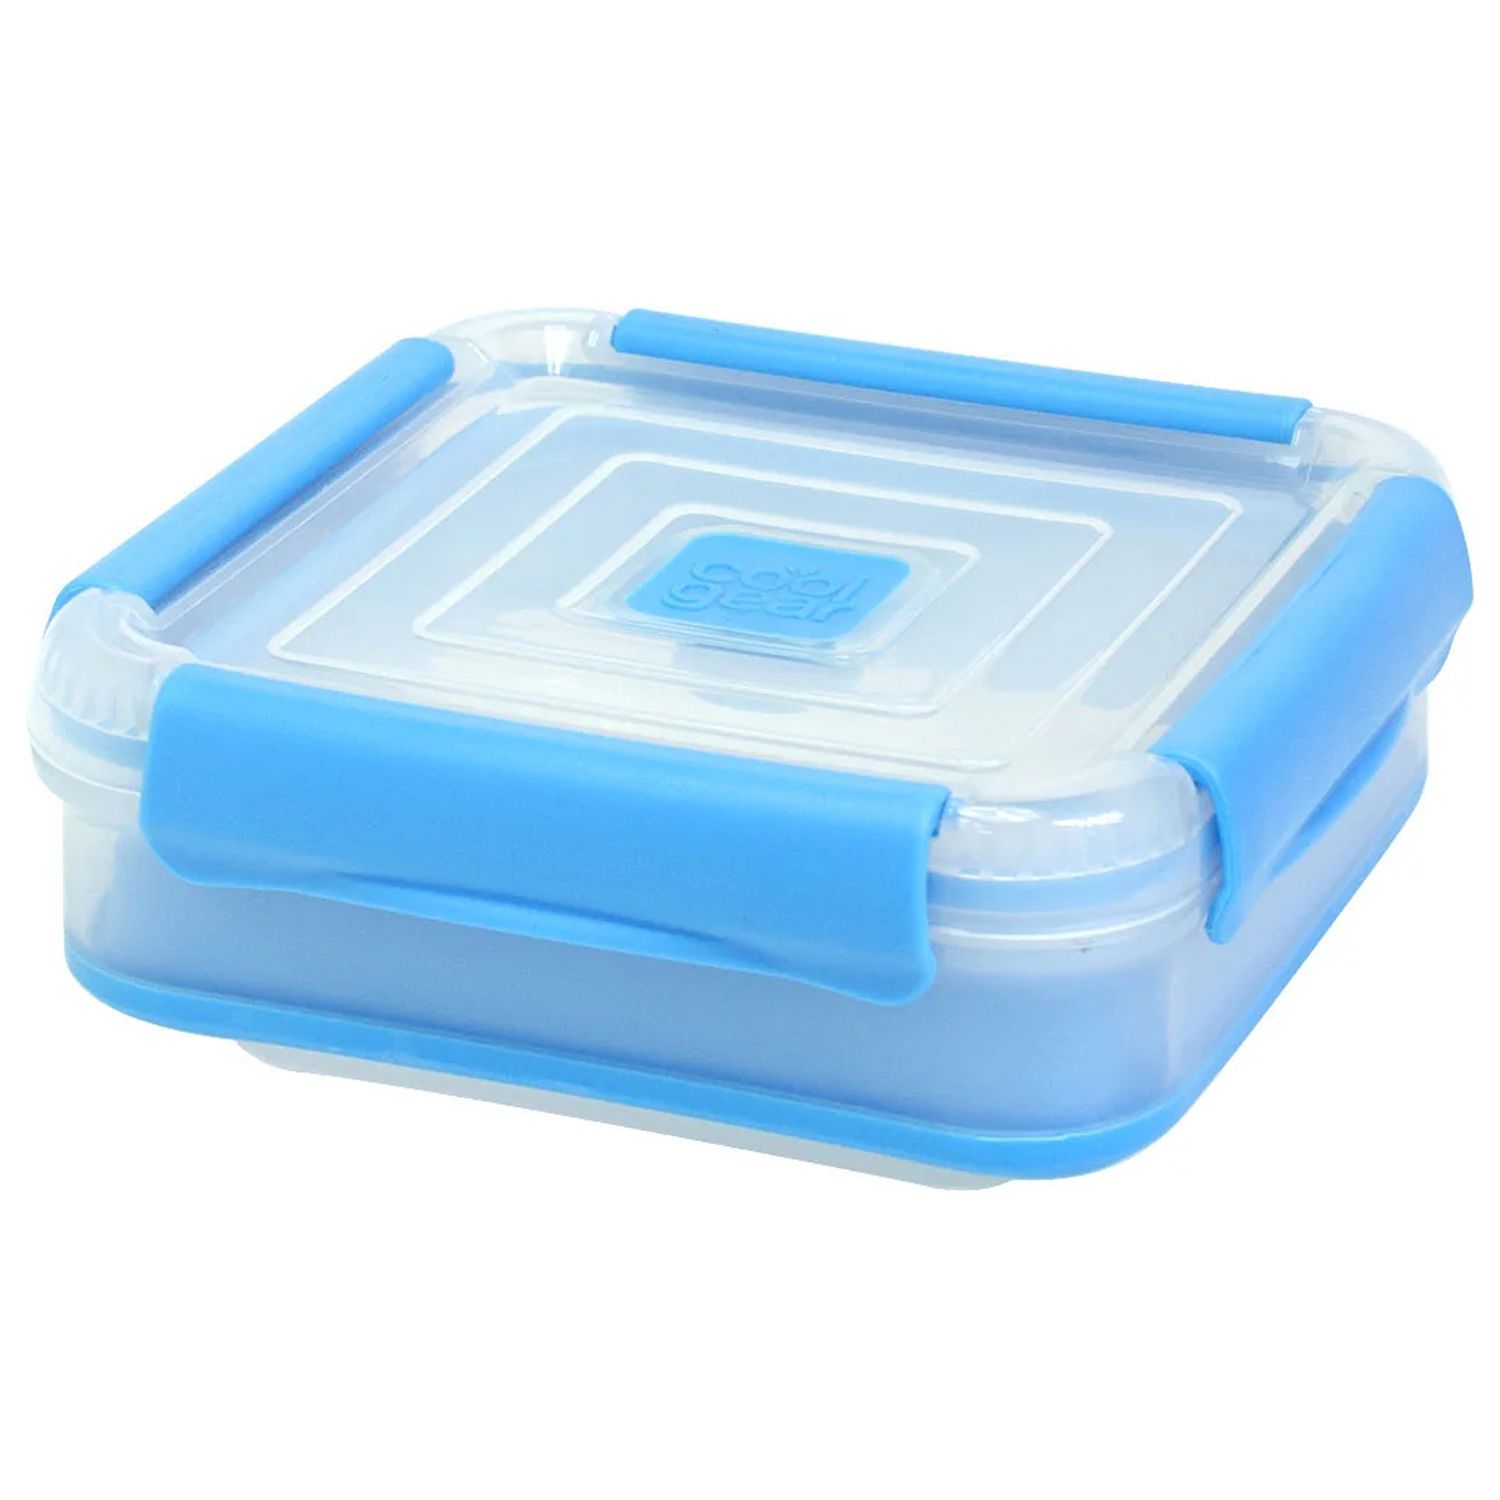 COOL GEAR 3-Pack Collapsible 5.5 Cup Square Food Container | Dishwasher and Microwave Safe | Perfect for On The Go Lunches and Leftovers | Expands to Hold 2x More | Air Tight Snaps Keeps Food Fresh - image 2 of 4